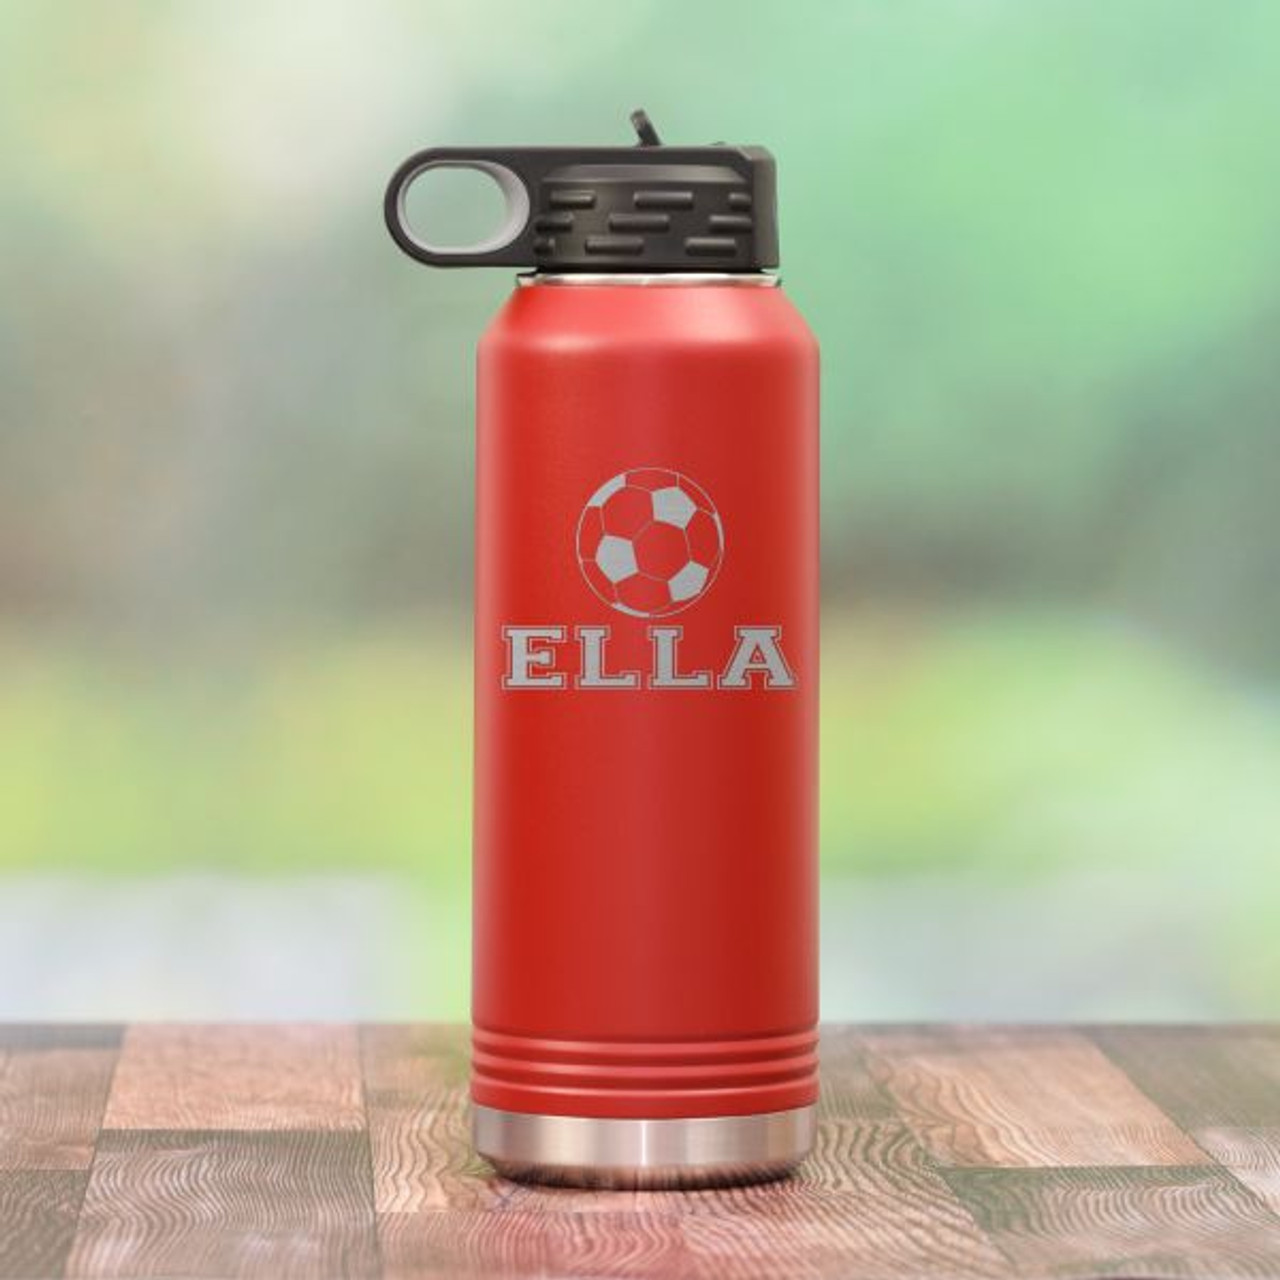 https://cdn11.bigcommerce.com/s-mdwz5t7wme/images/stencil/1280x1280/products/1884/6291/DW5038-Soccer-waterbottle__55547.1605629720.jpg?c=2?imbypass=on